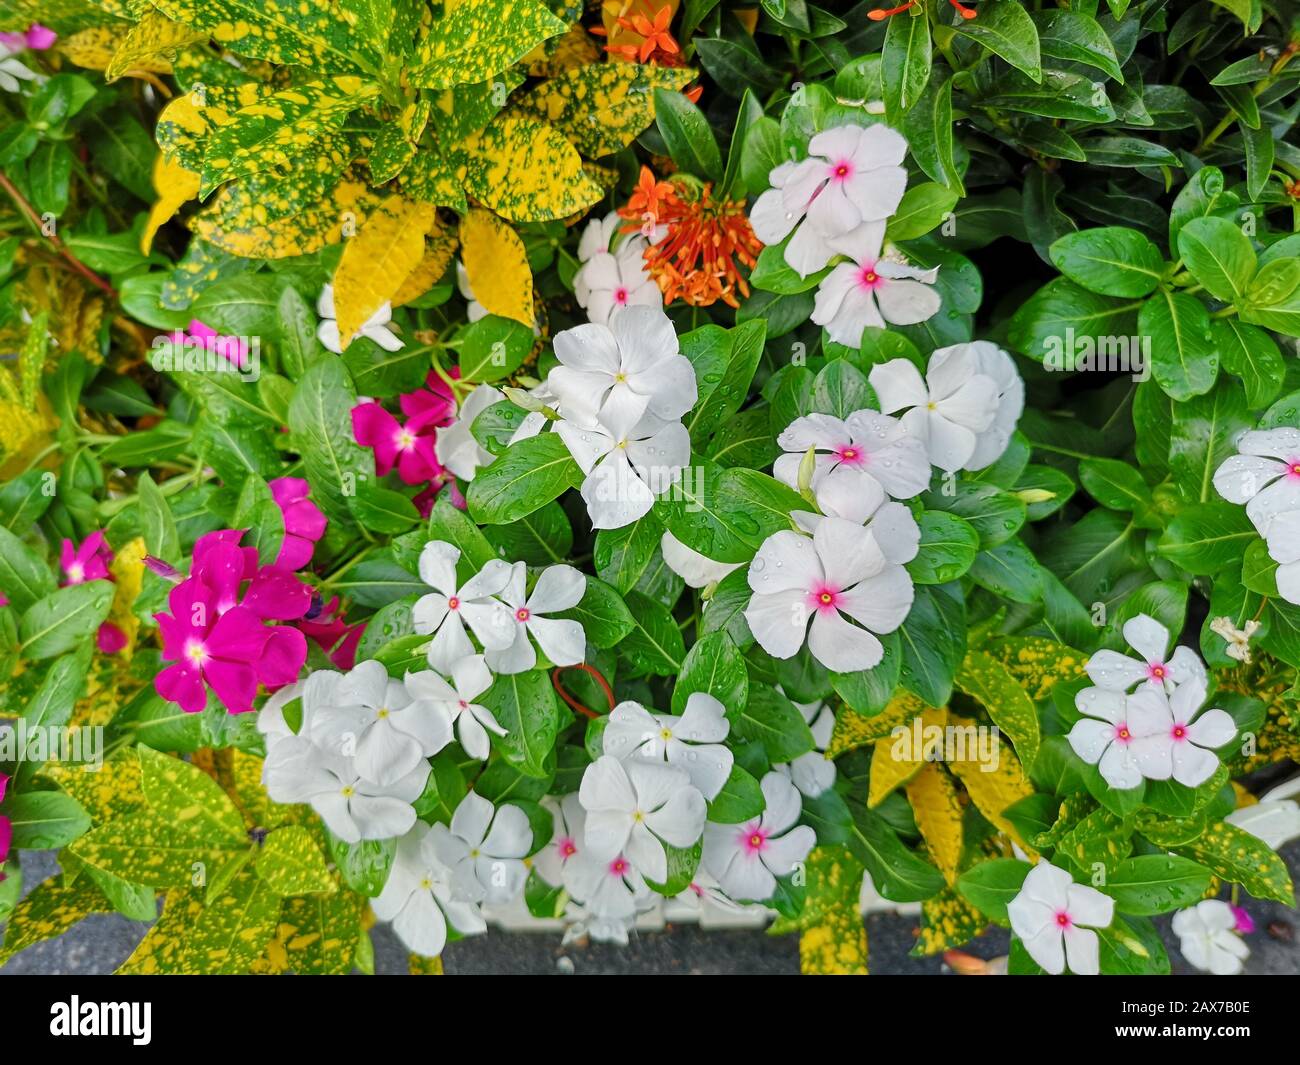 West Indian periwinkle, Bringht eye, Vinca, Cayenne jasmine, Old maid name pink, white, purple color flower in garden Stock Photo